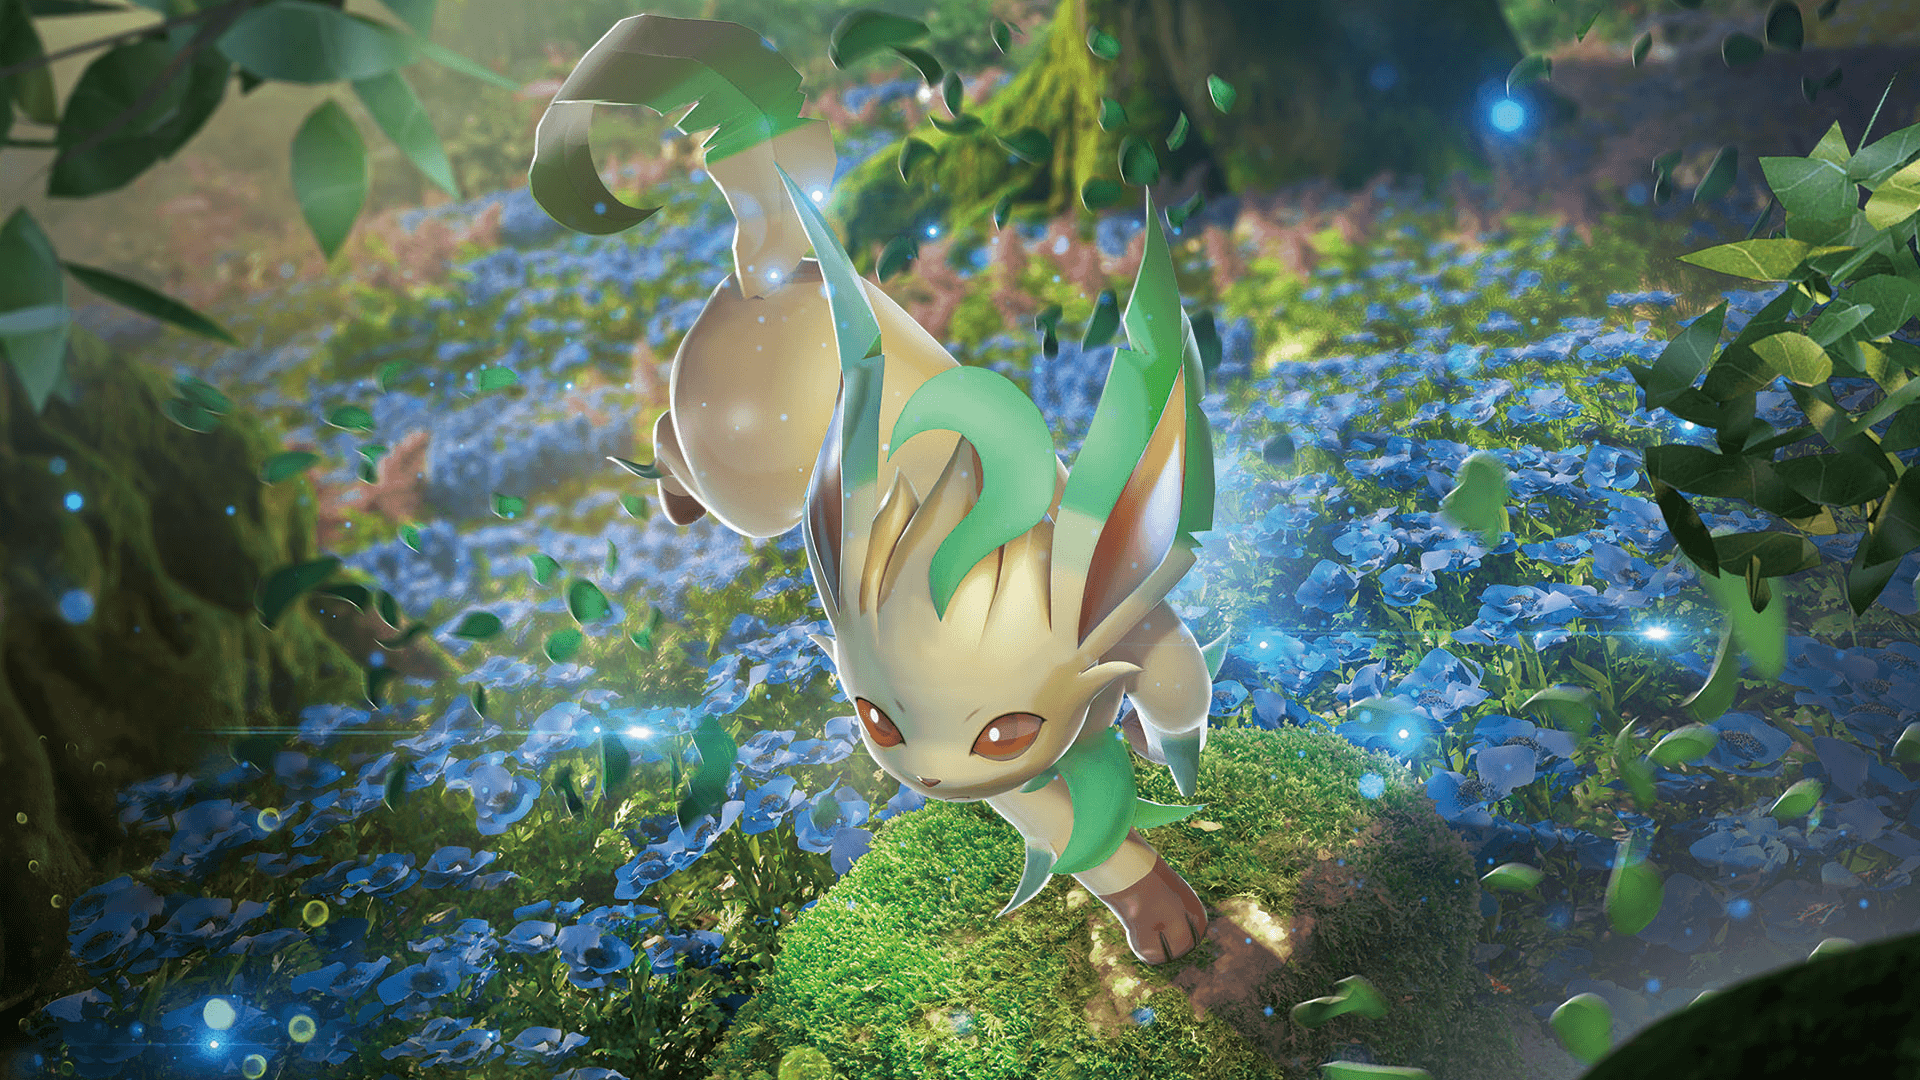 Leafeon (Ultra Prism booster pack art) [1920x1080]